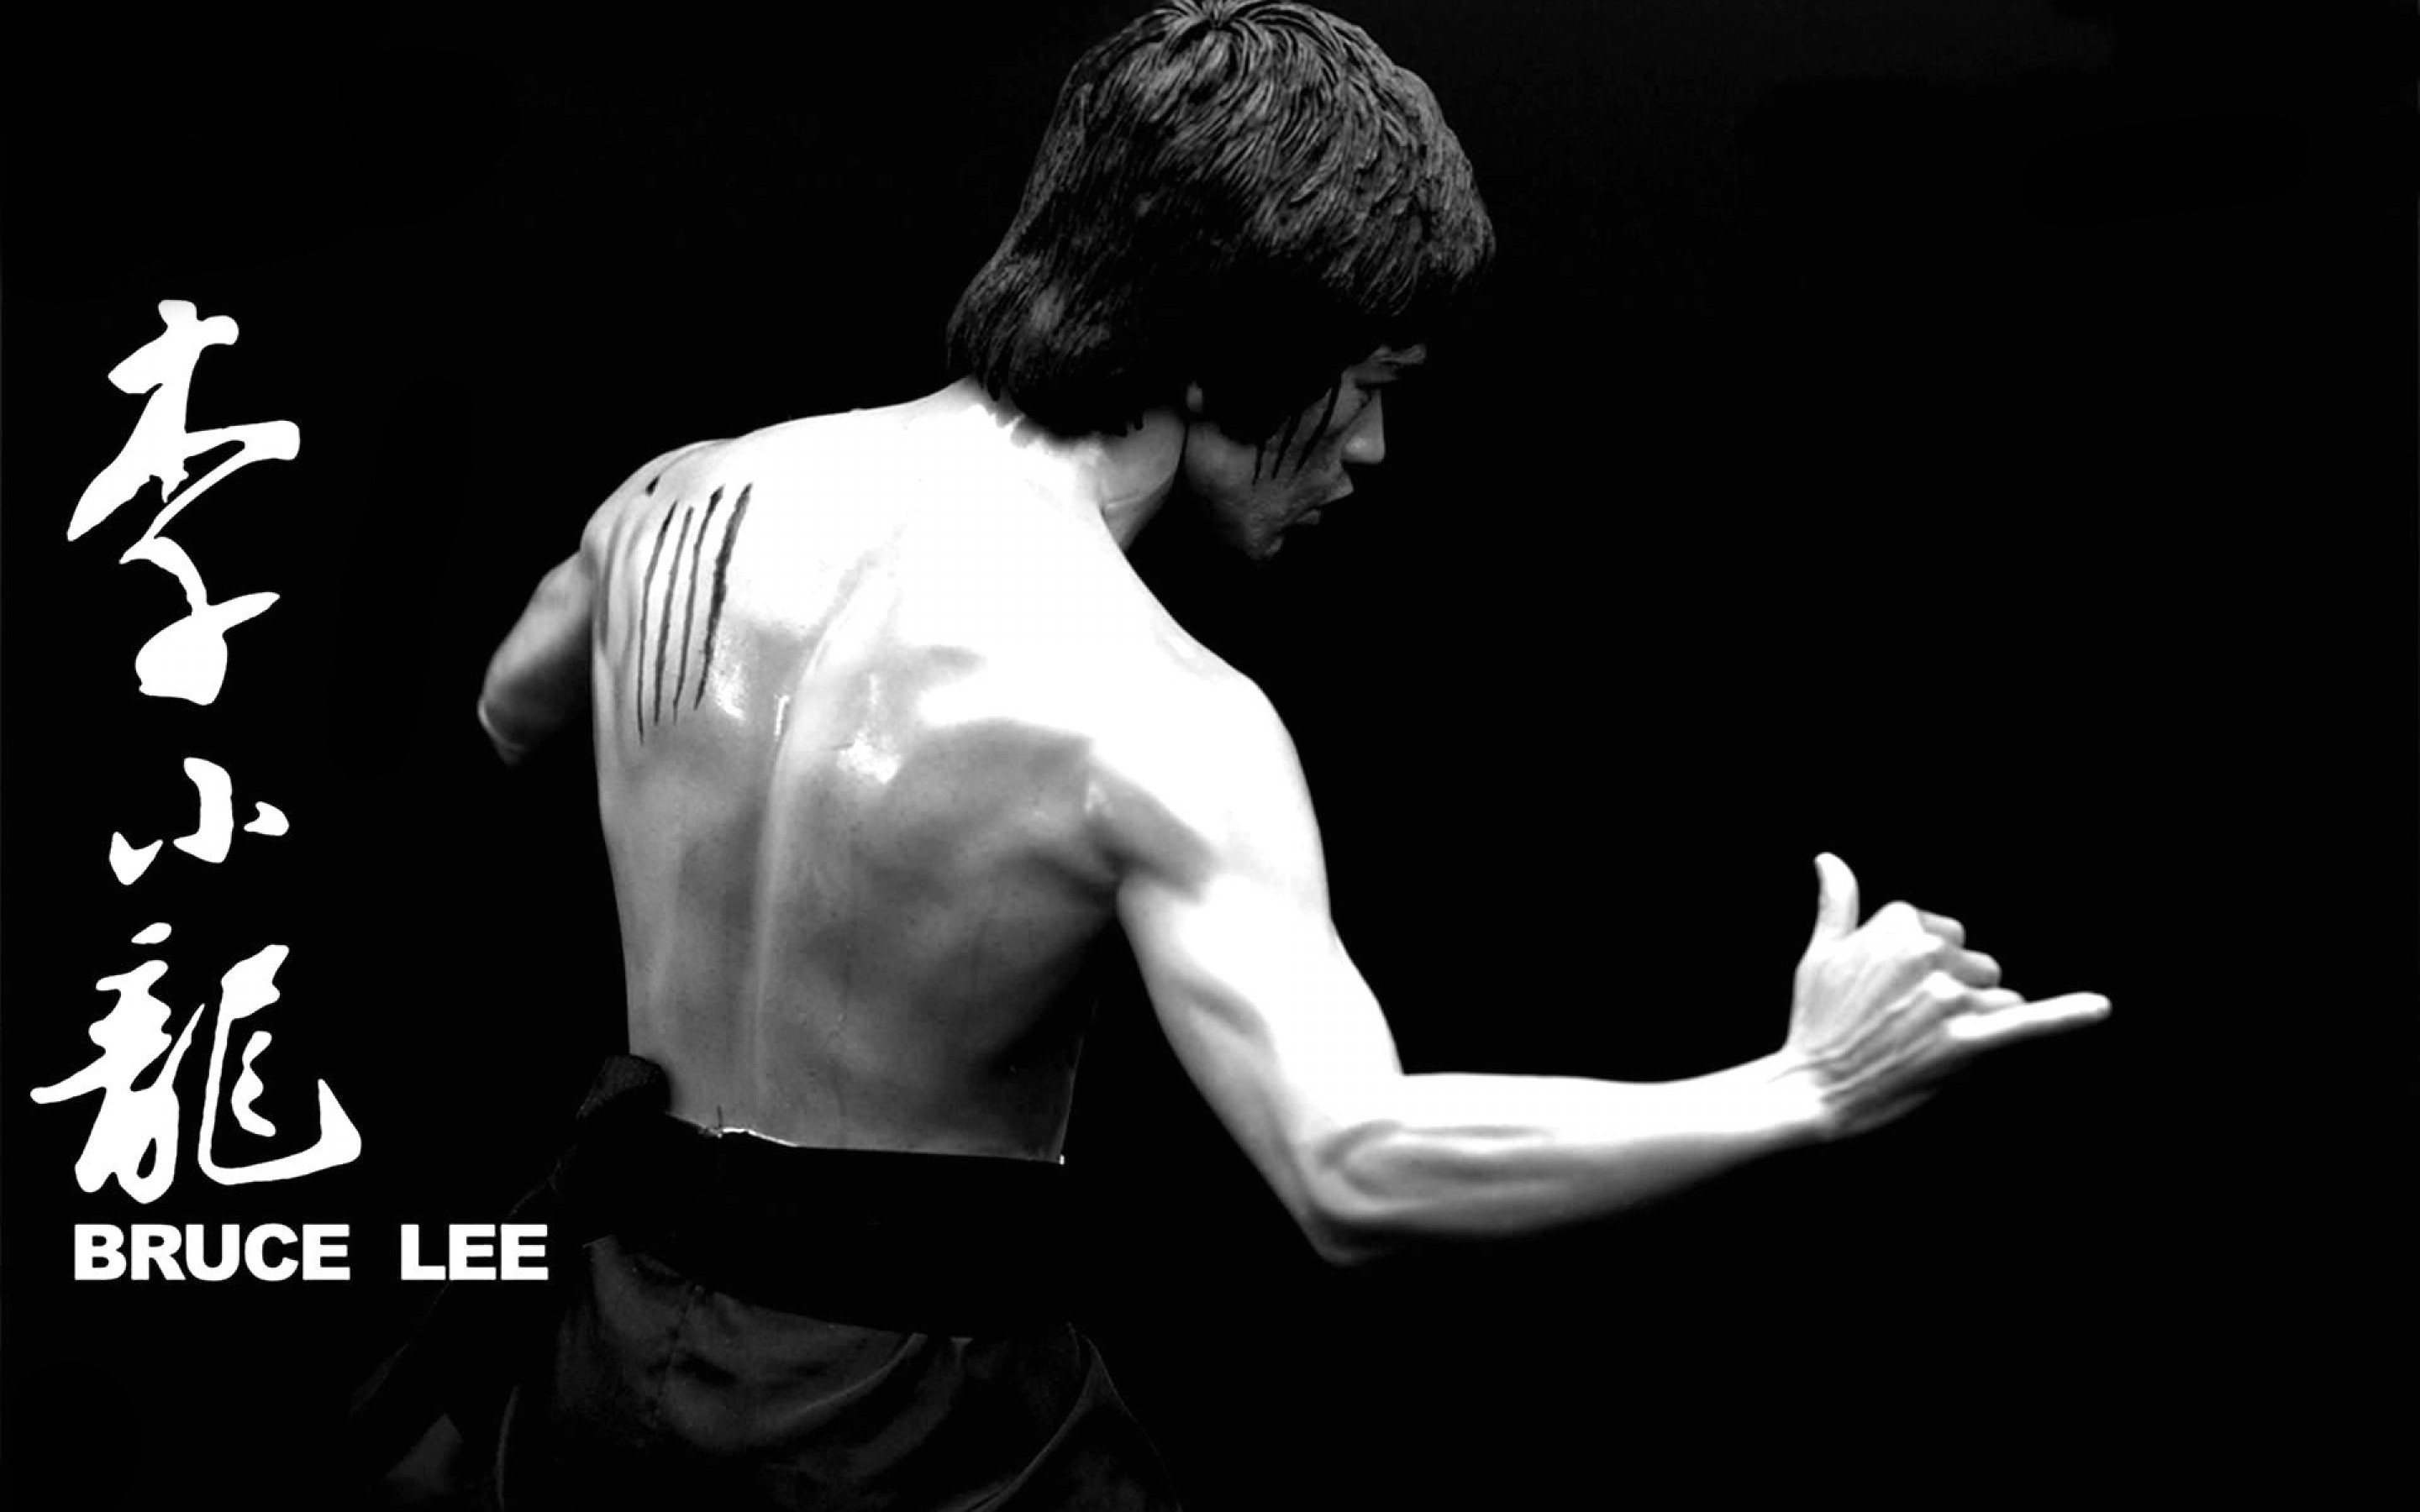 2880x1800 Bruce Lee HD Wallpaper for Android Free Download on MoboMarket